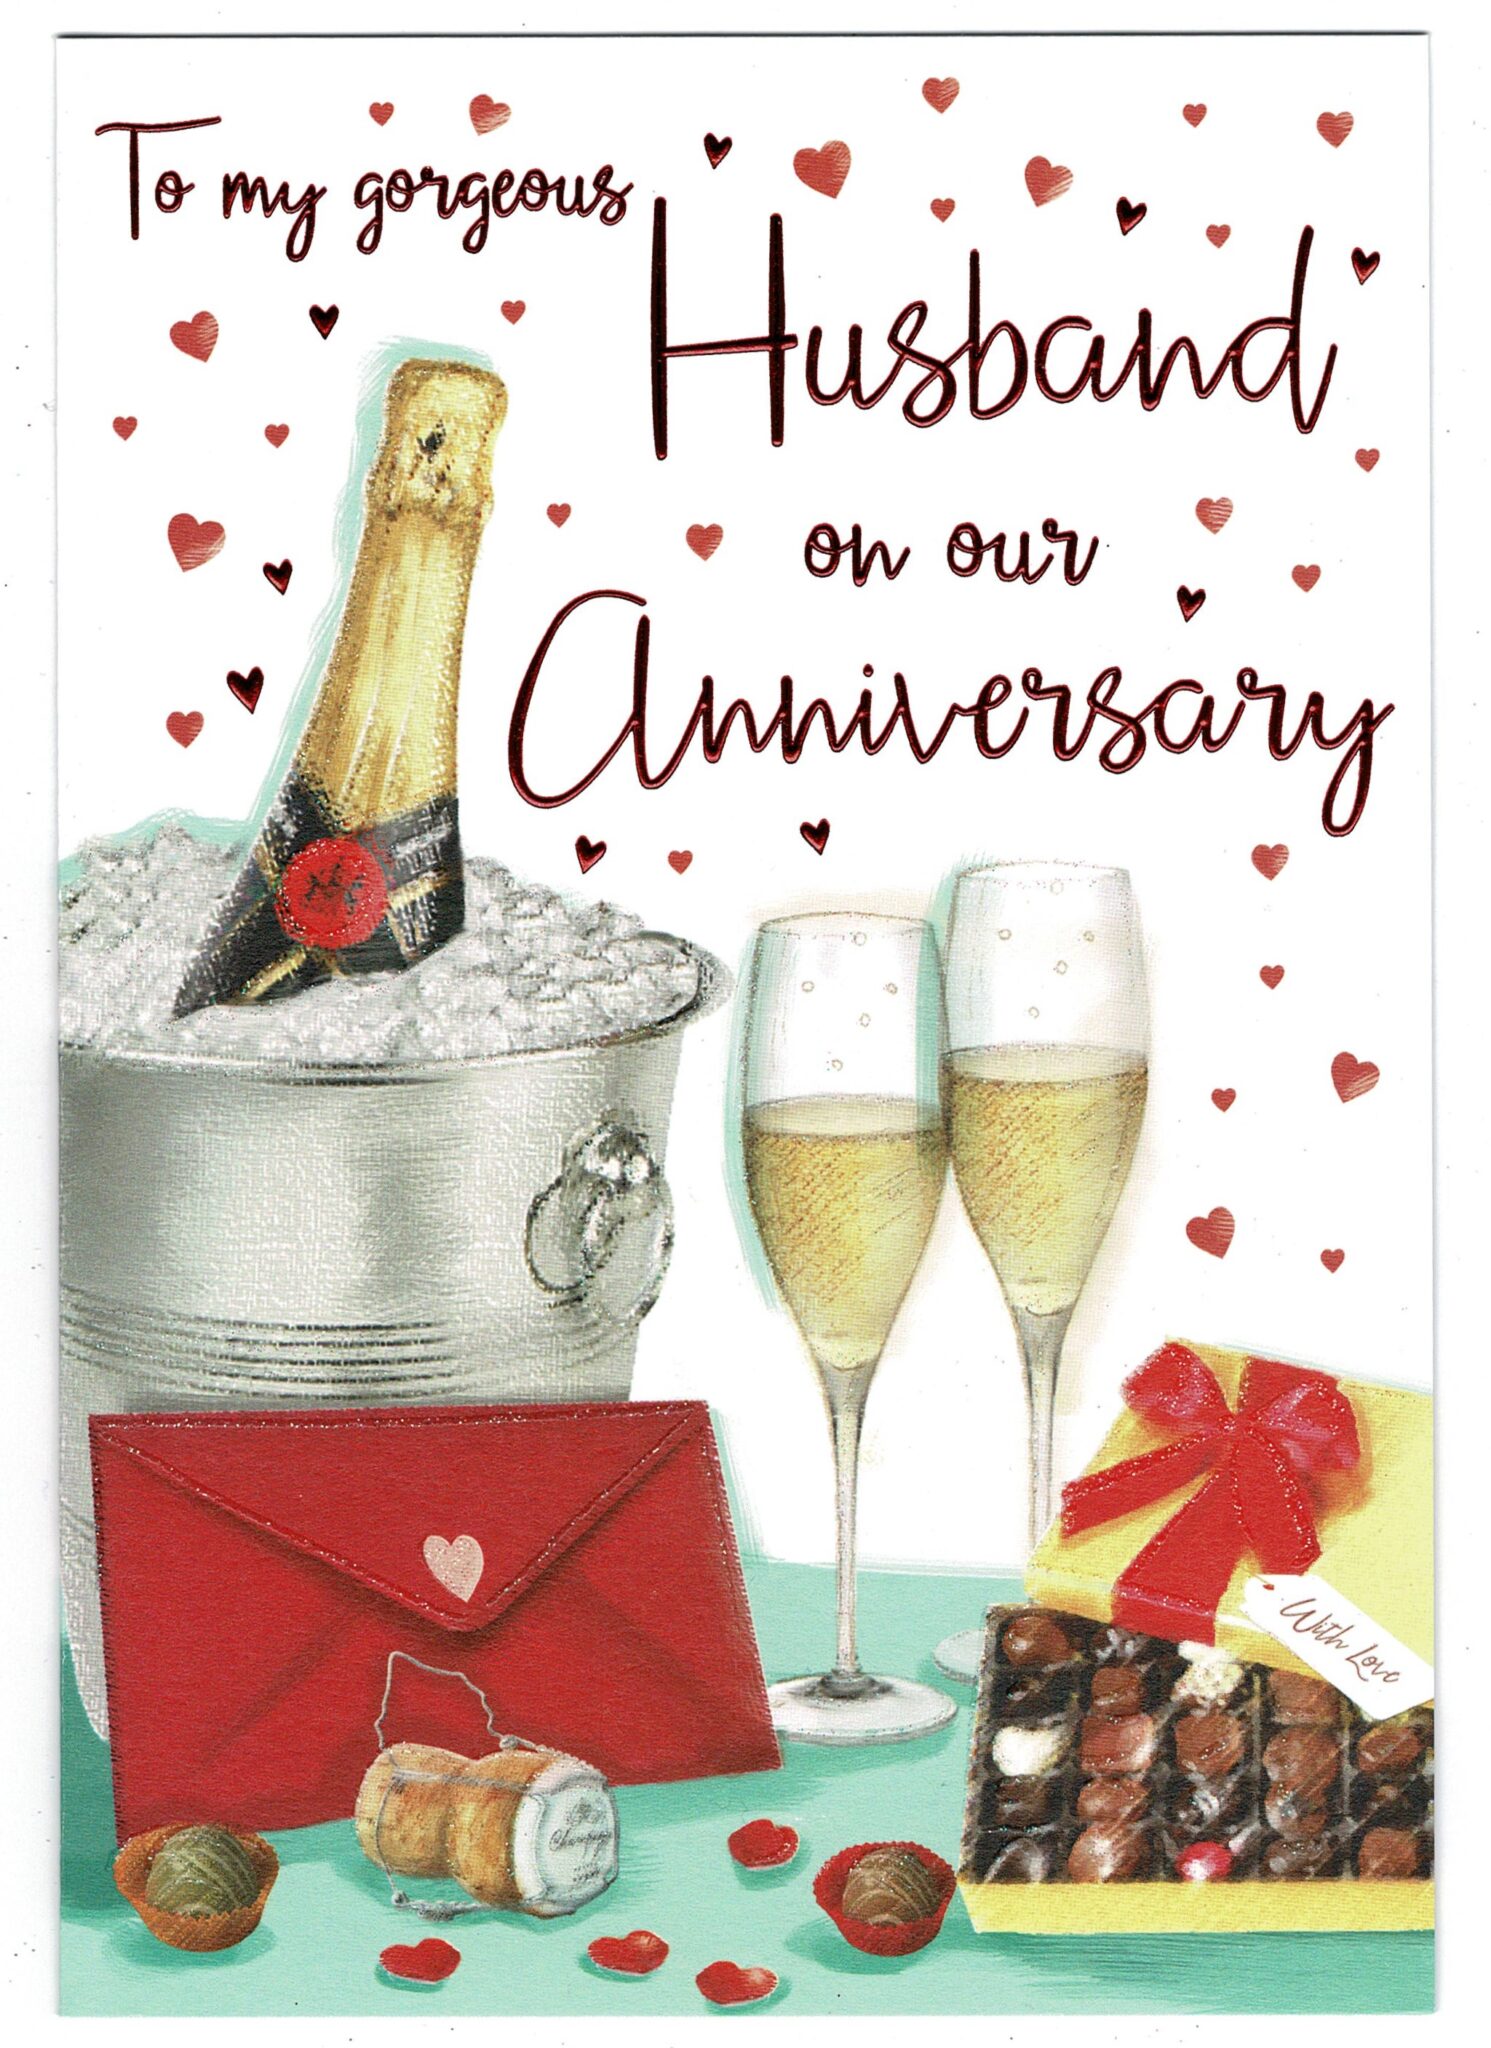 husband-wedding-anniversary-card-to-my-gorgeous-husband-on-our-anniversary-with-love-gifts